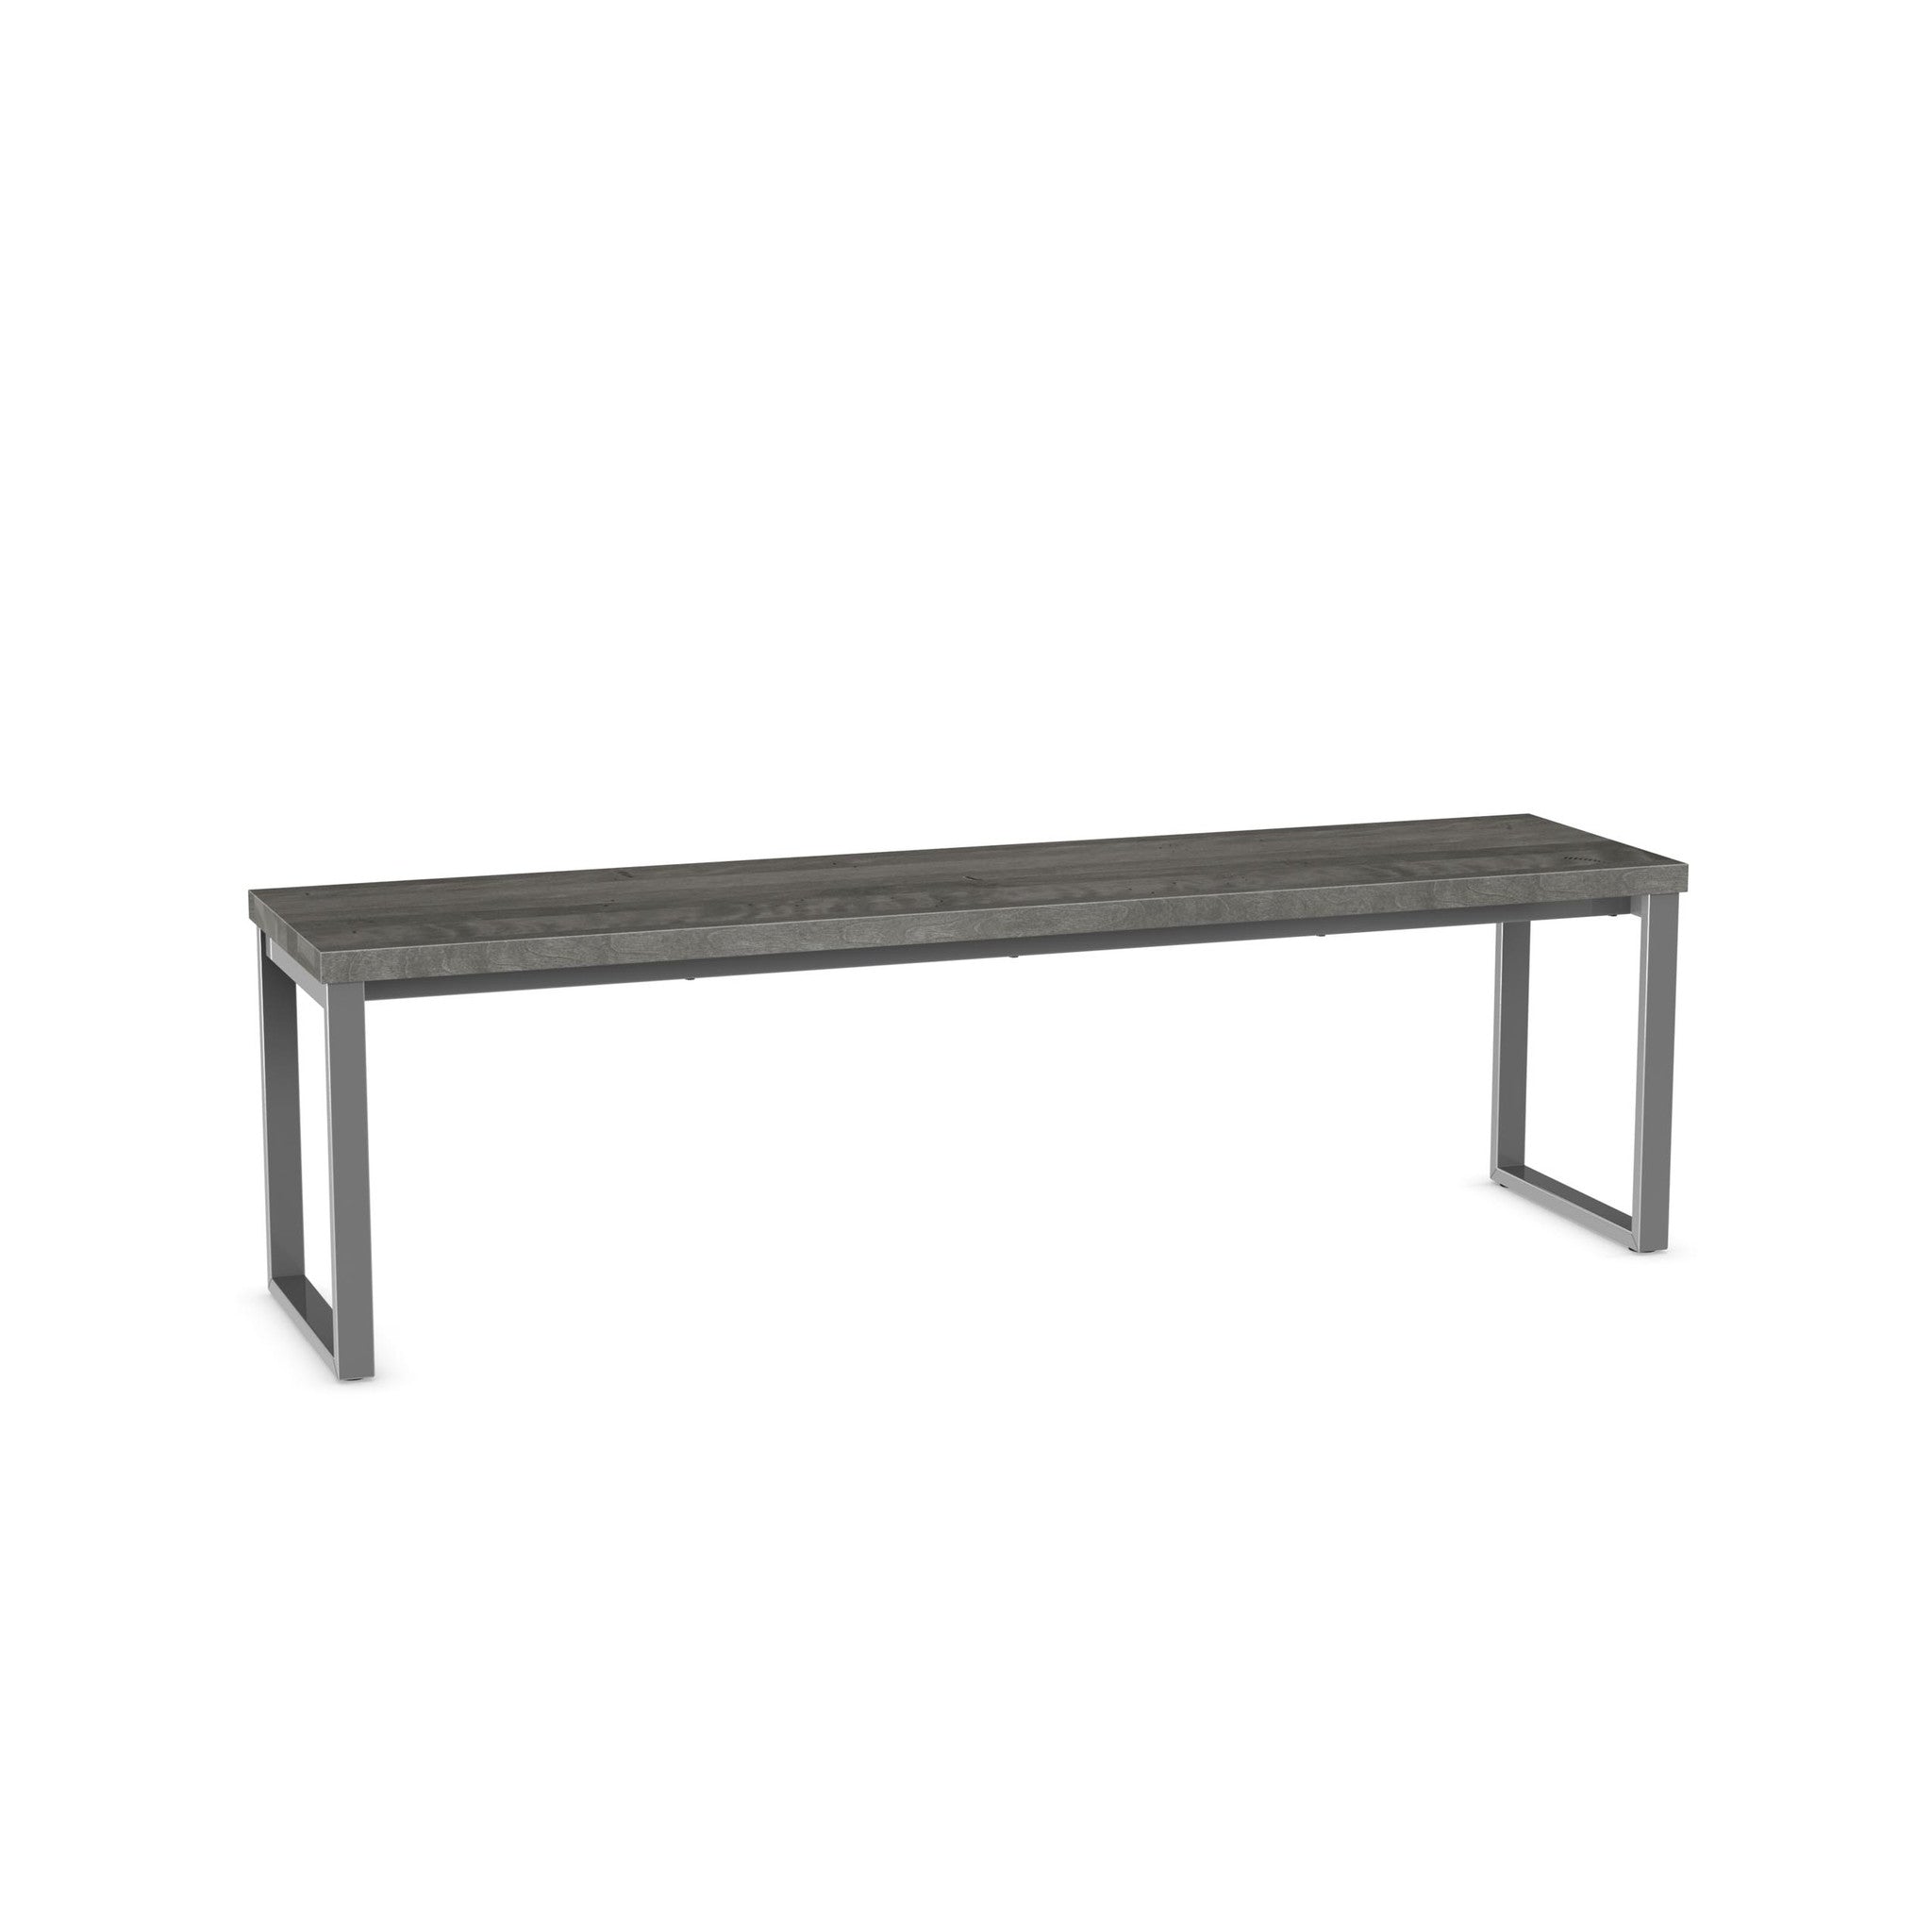 Picture of Dryden Bench - Wood - 60"